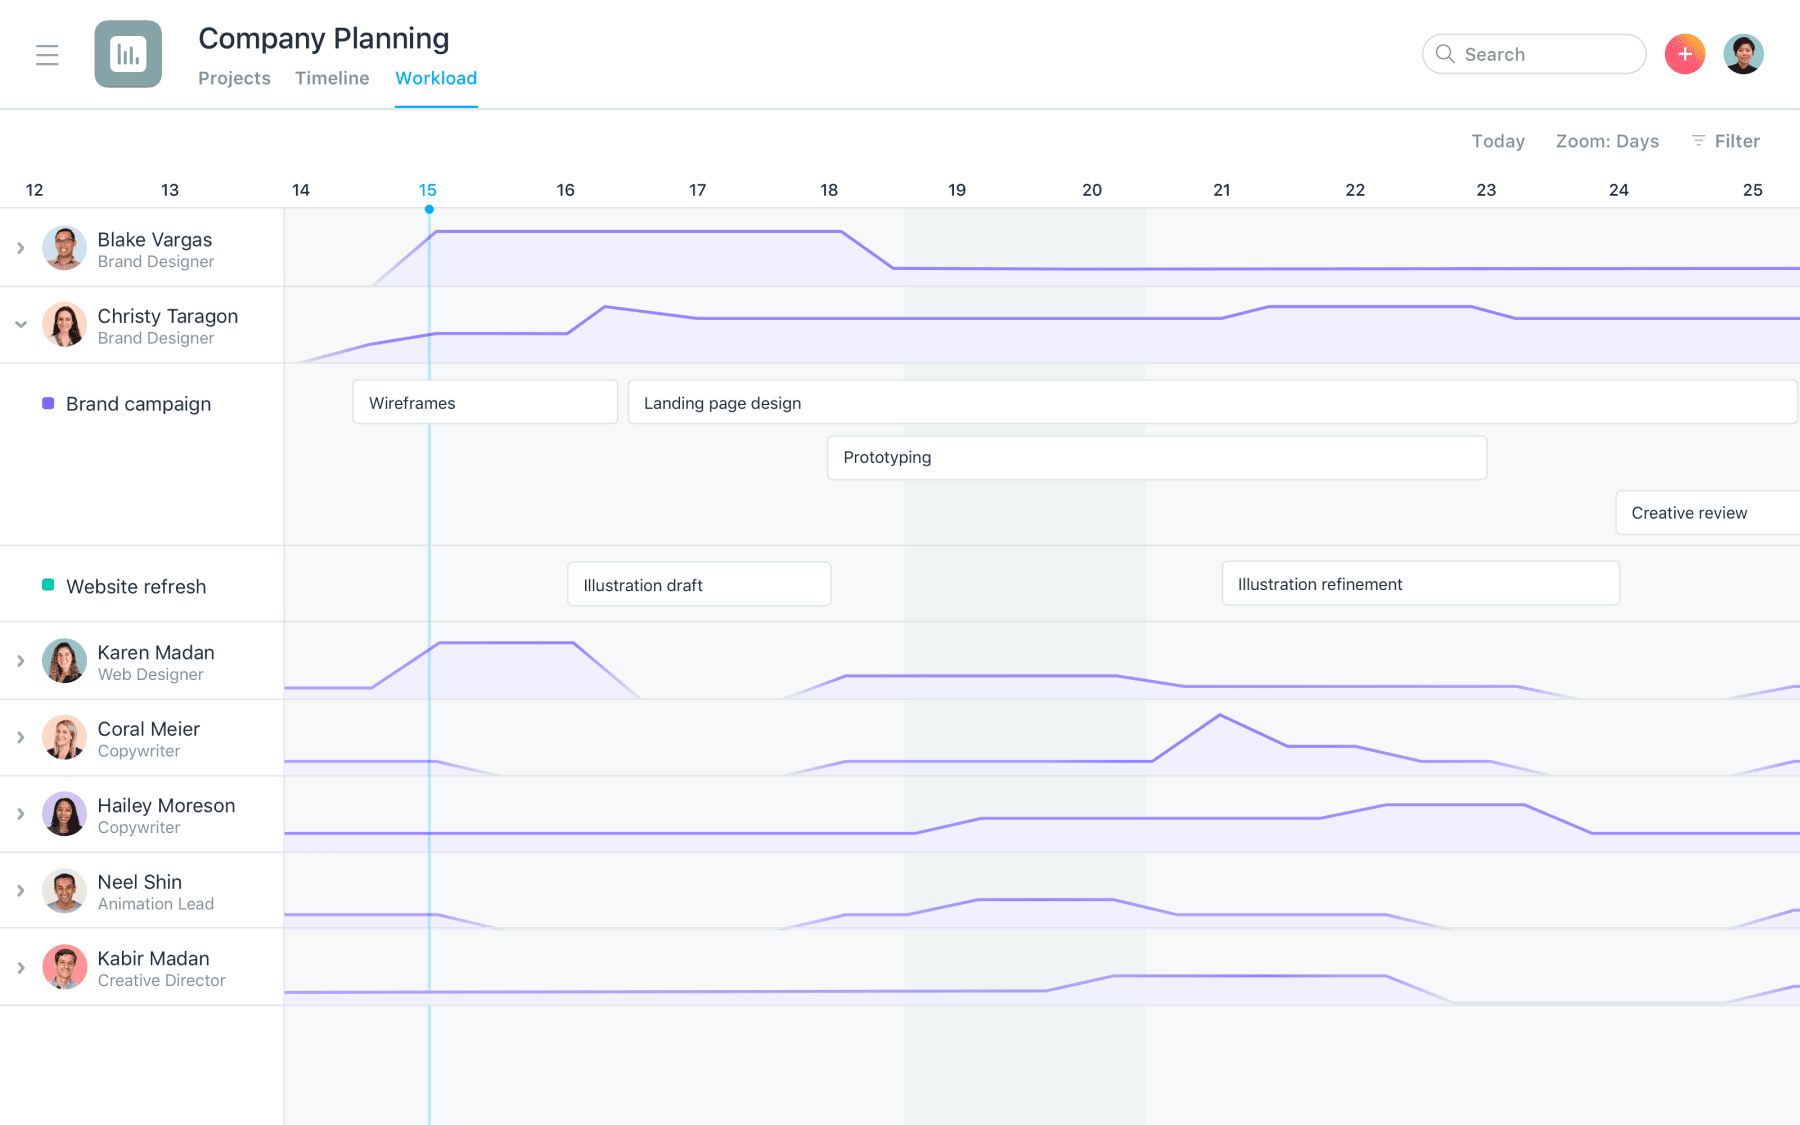 [Product UI] Manage team workloads in Asana (Workload)